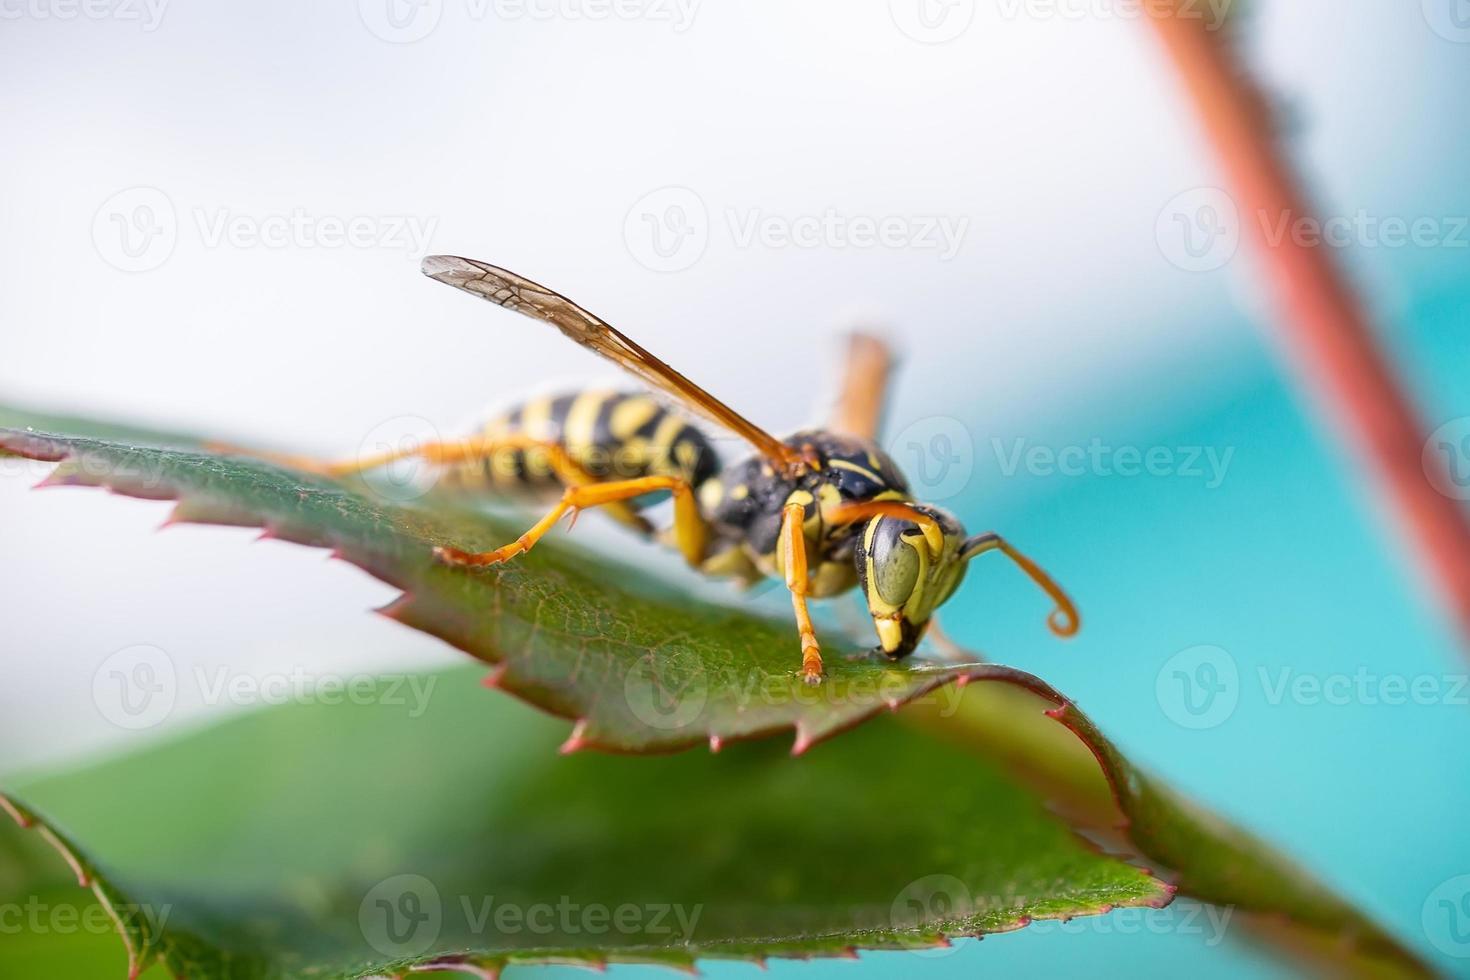 The wasp is sitting on green leaves. The dangerous yellow-and-black striped common Wasp sits on leaves. photo